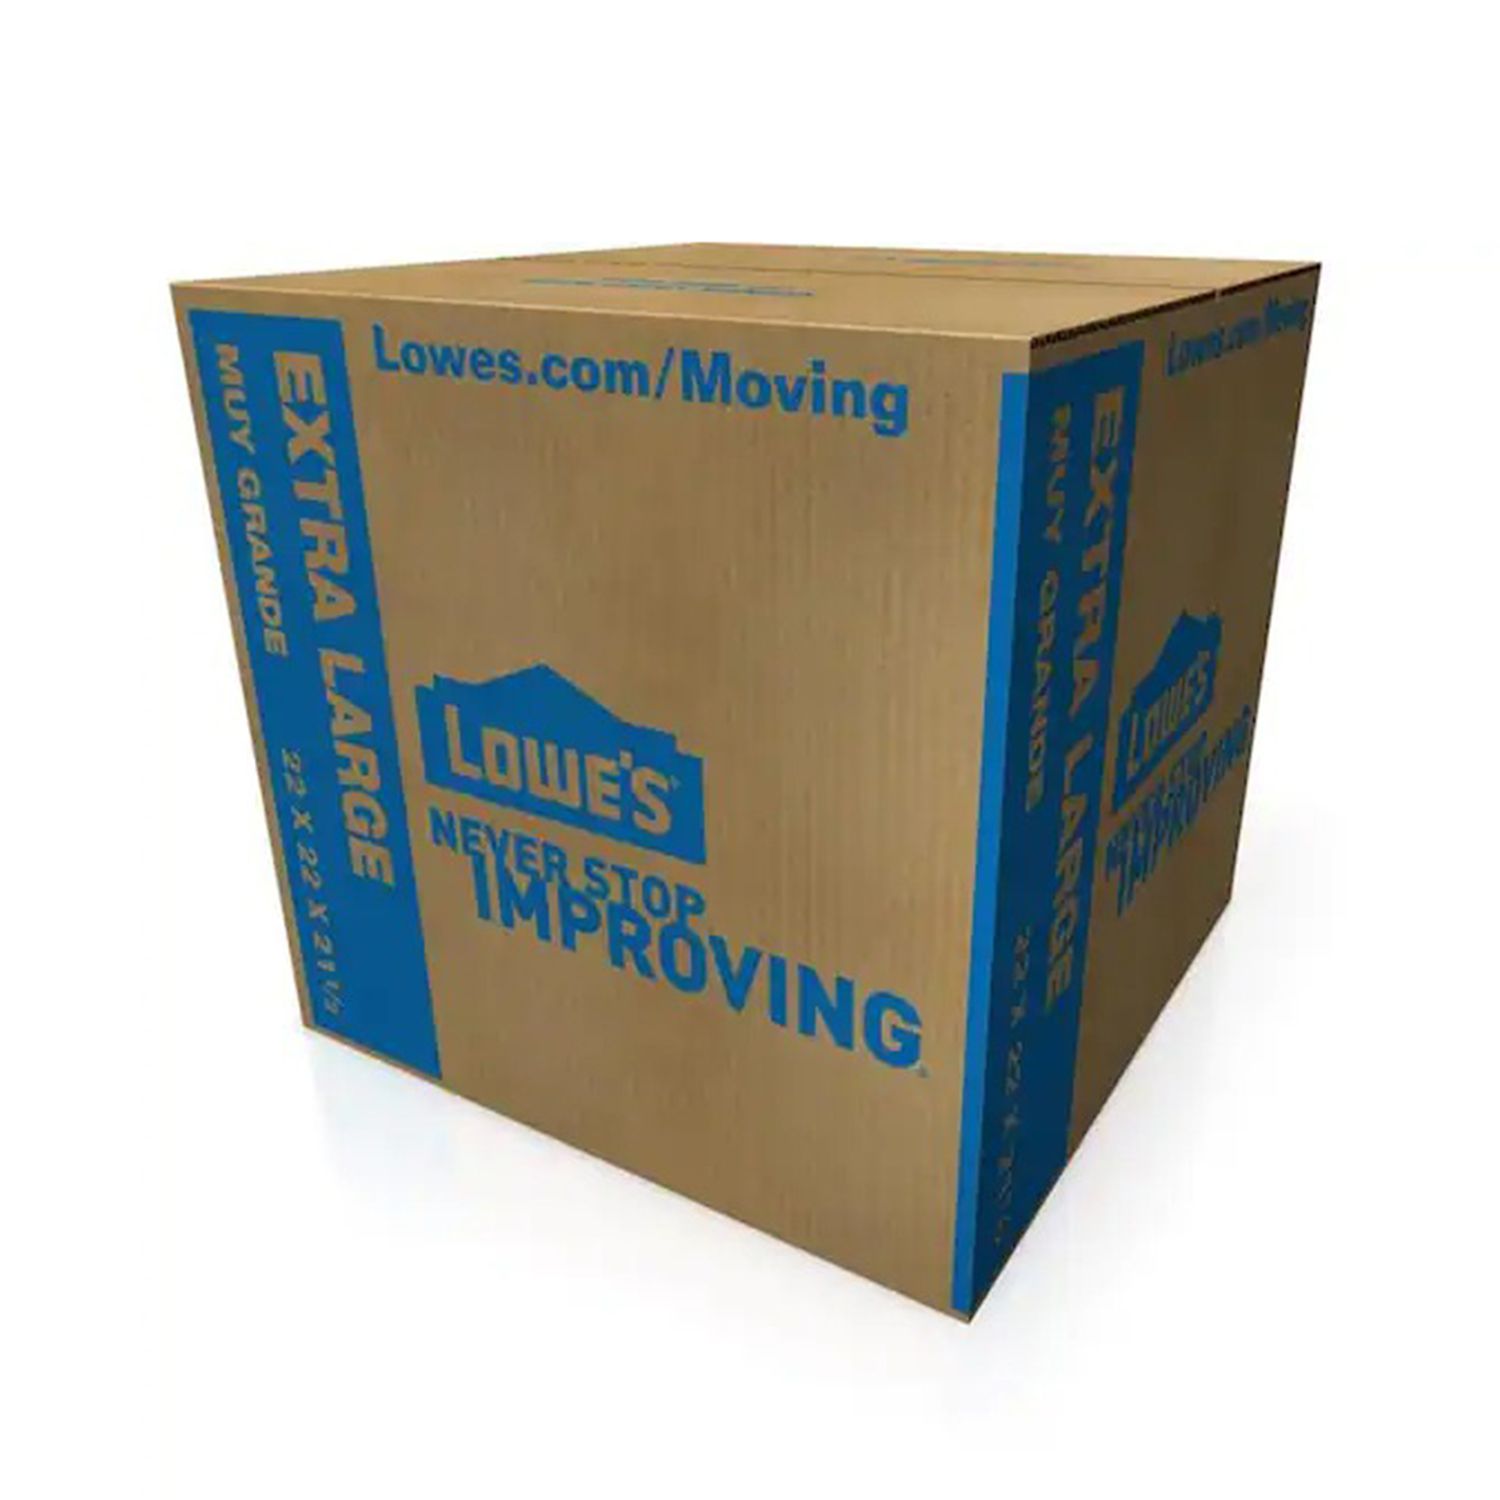 40x40x50cm Small 500mm Bubble Wrap & Brown Tape Room List 16x16x20 X-LARGE, 5 Removal Packing Cartons With Carry Handles X LARGE DOUBLE WALL Cardboard Storage House Moving Boxes